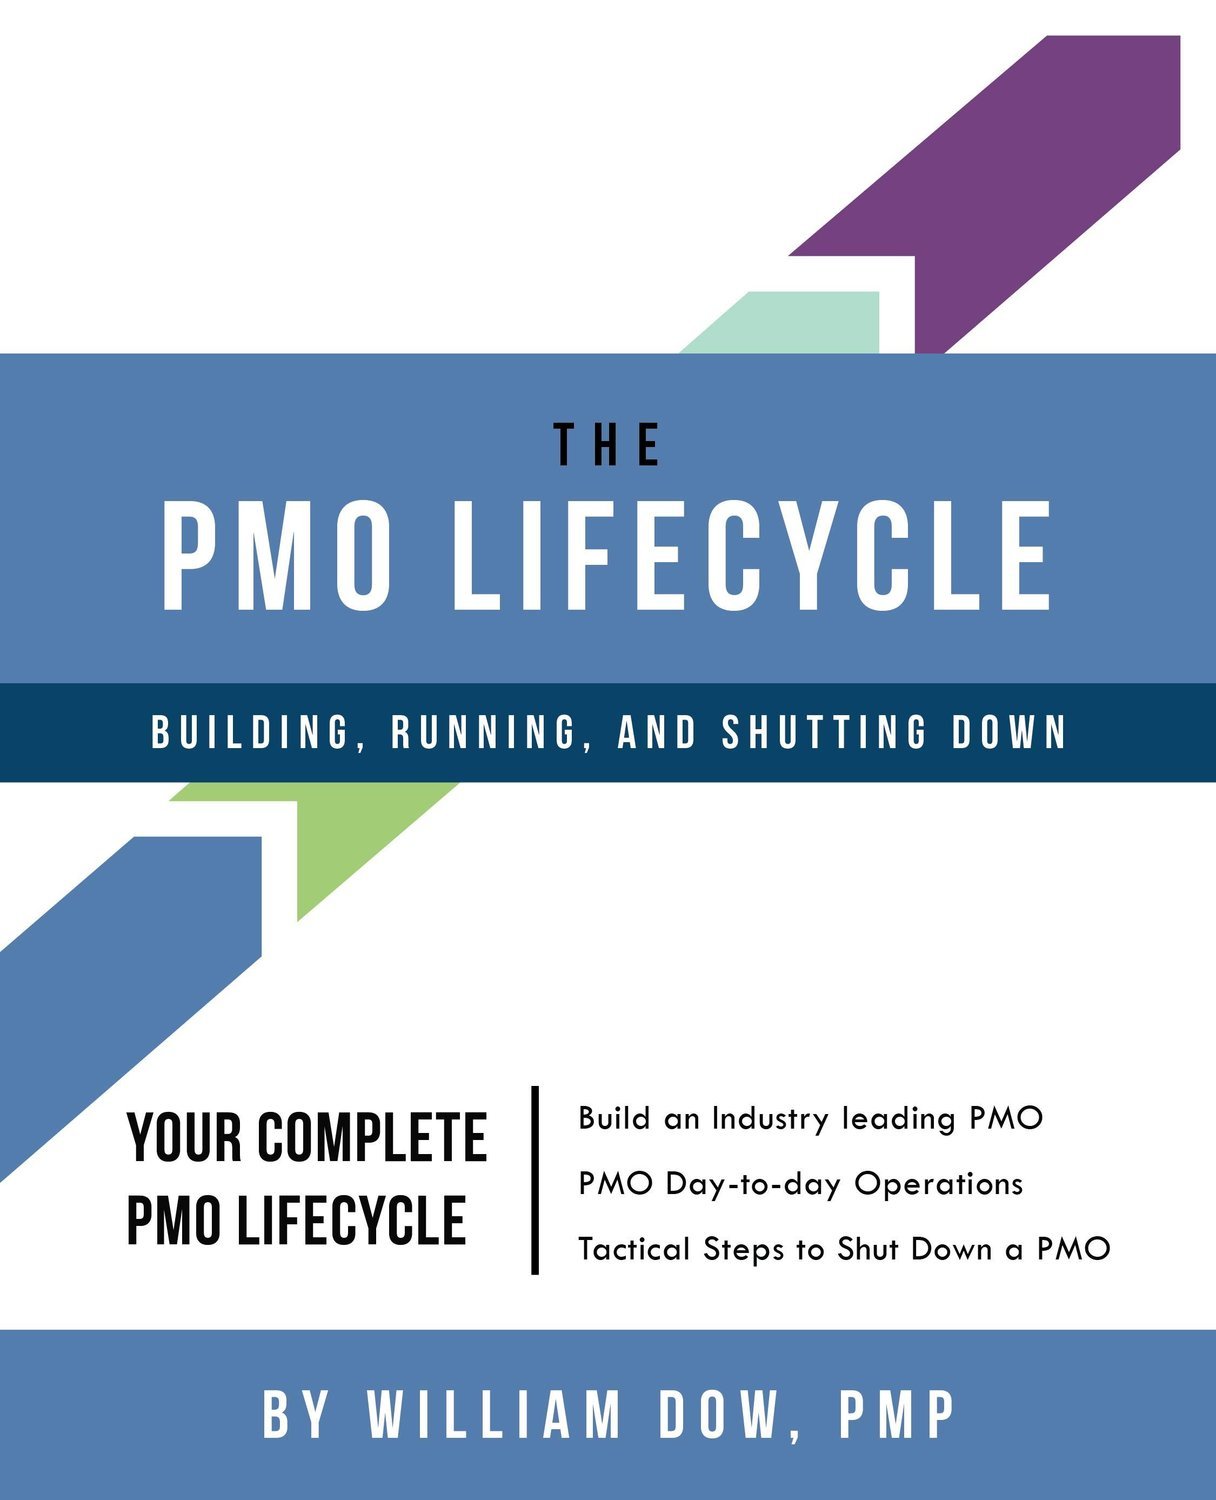 4 Hour Workshop - How to Build, Run & Shutdown a PMO - Author/Instructor Bill Dow, PMP